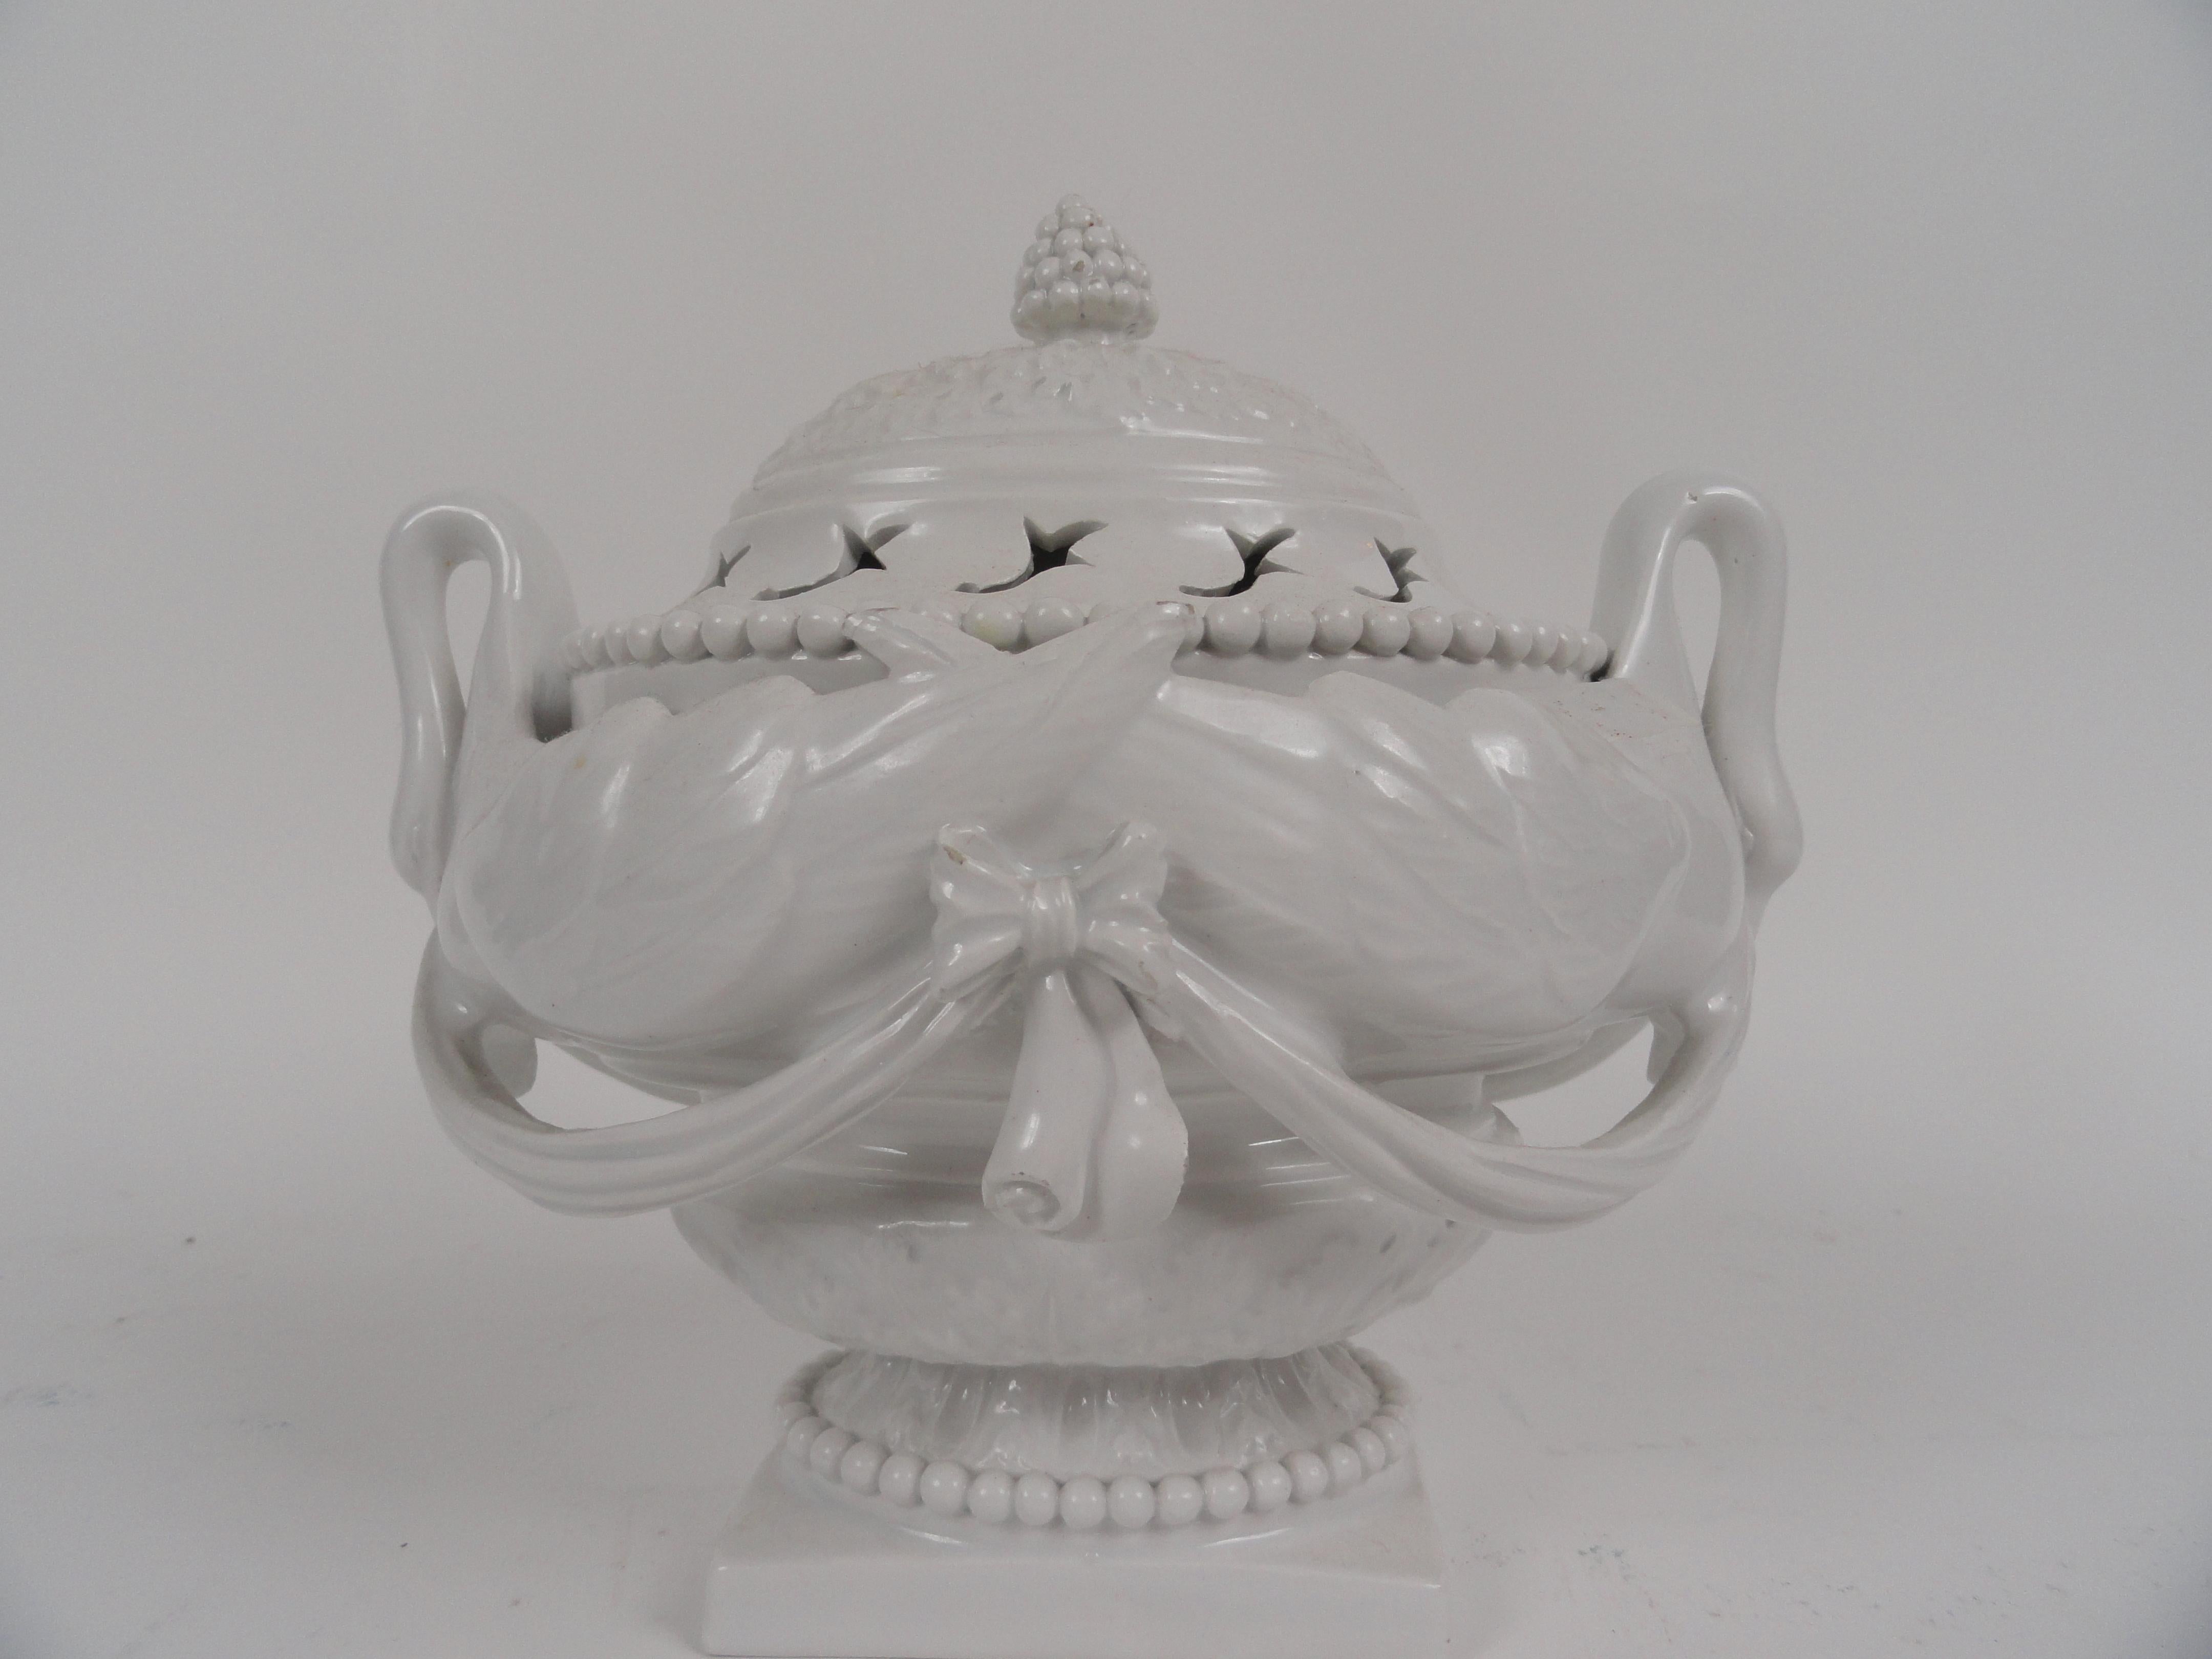 20th century Italian soft porcelain perfumery. Elliptical vessel features swan handles, draping and applied medallion. Removable lid. Stamped 